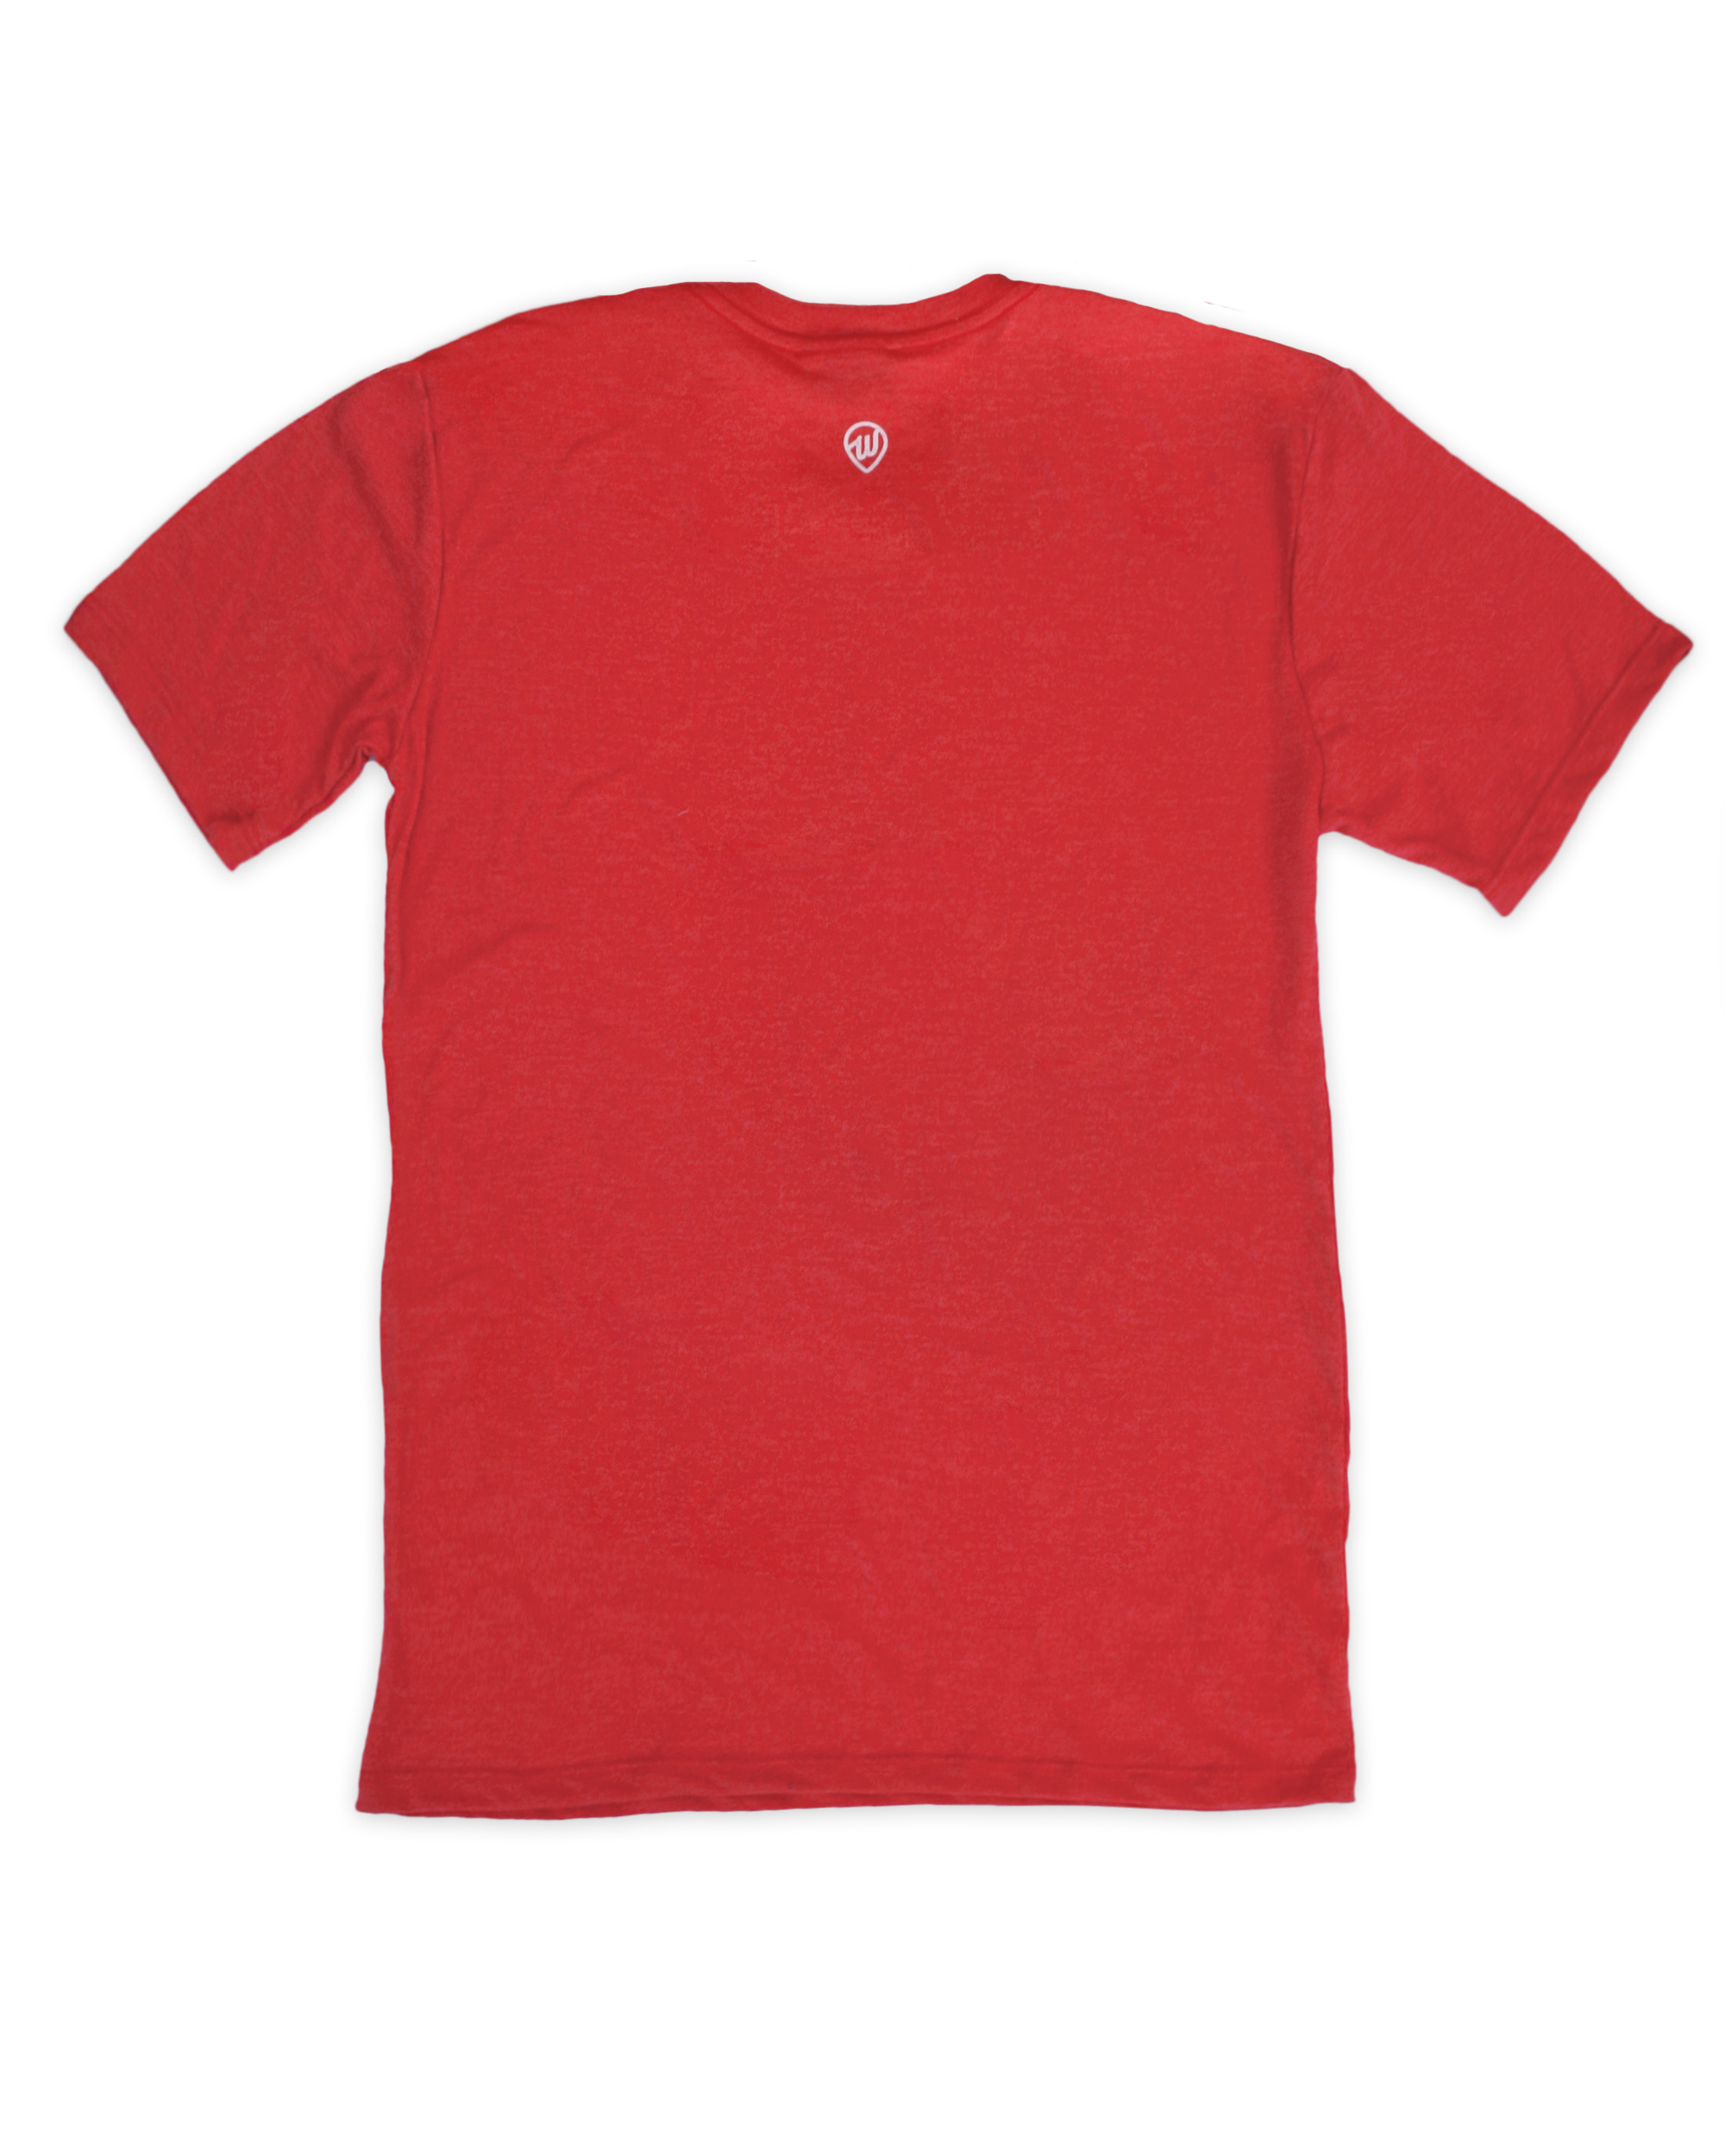 The Red Blank Tee - Where I'm From